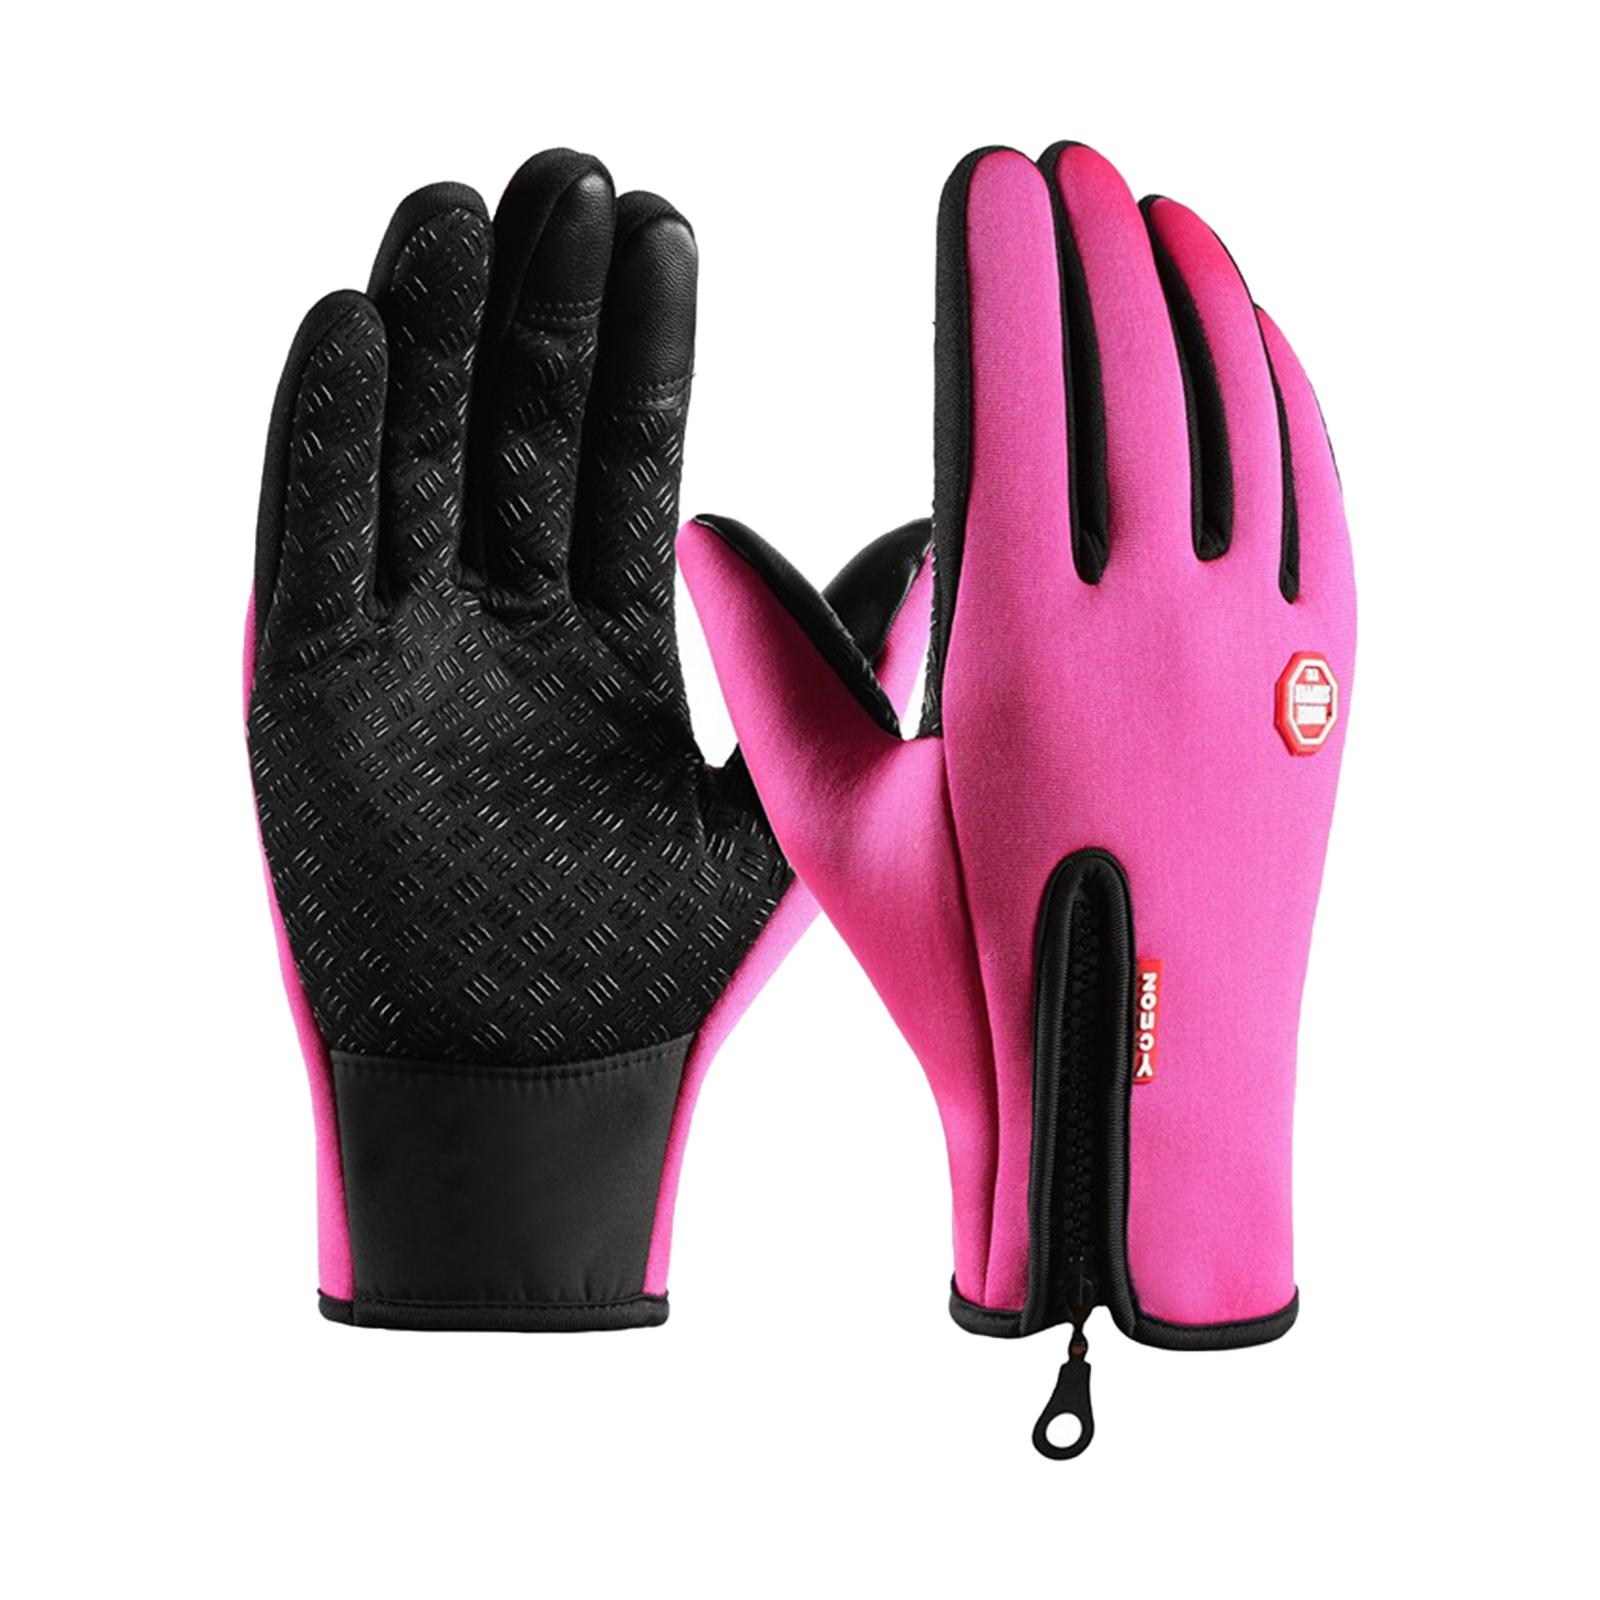 Winter Gloves Windproof Insulated for Motorcycle Cycling Adults Unisex XXL Pink